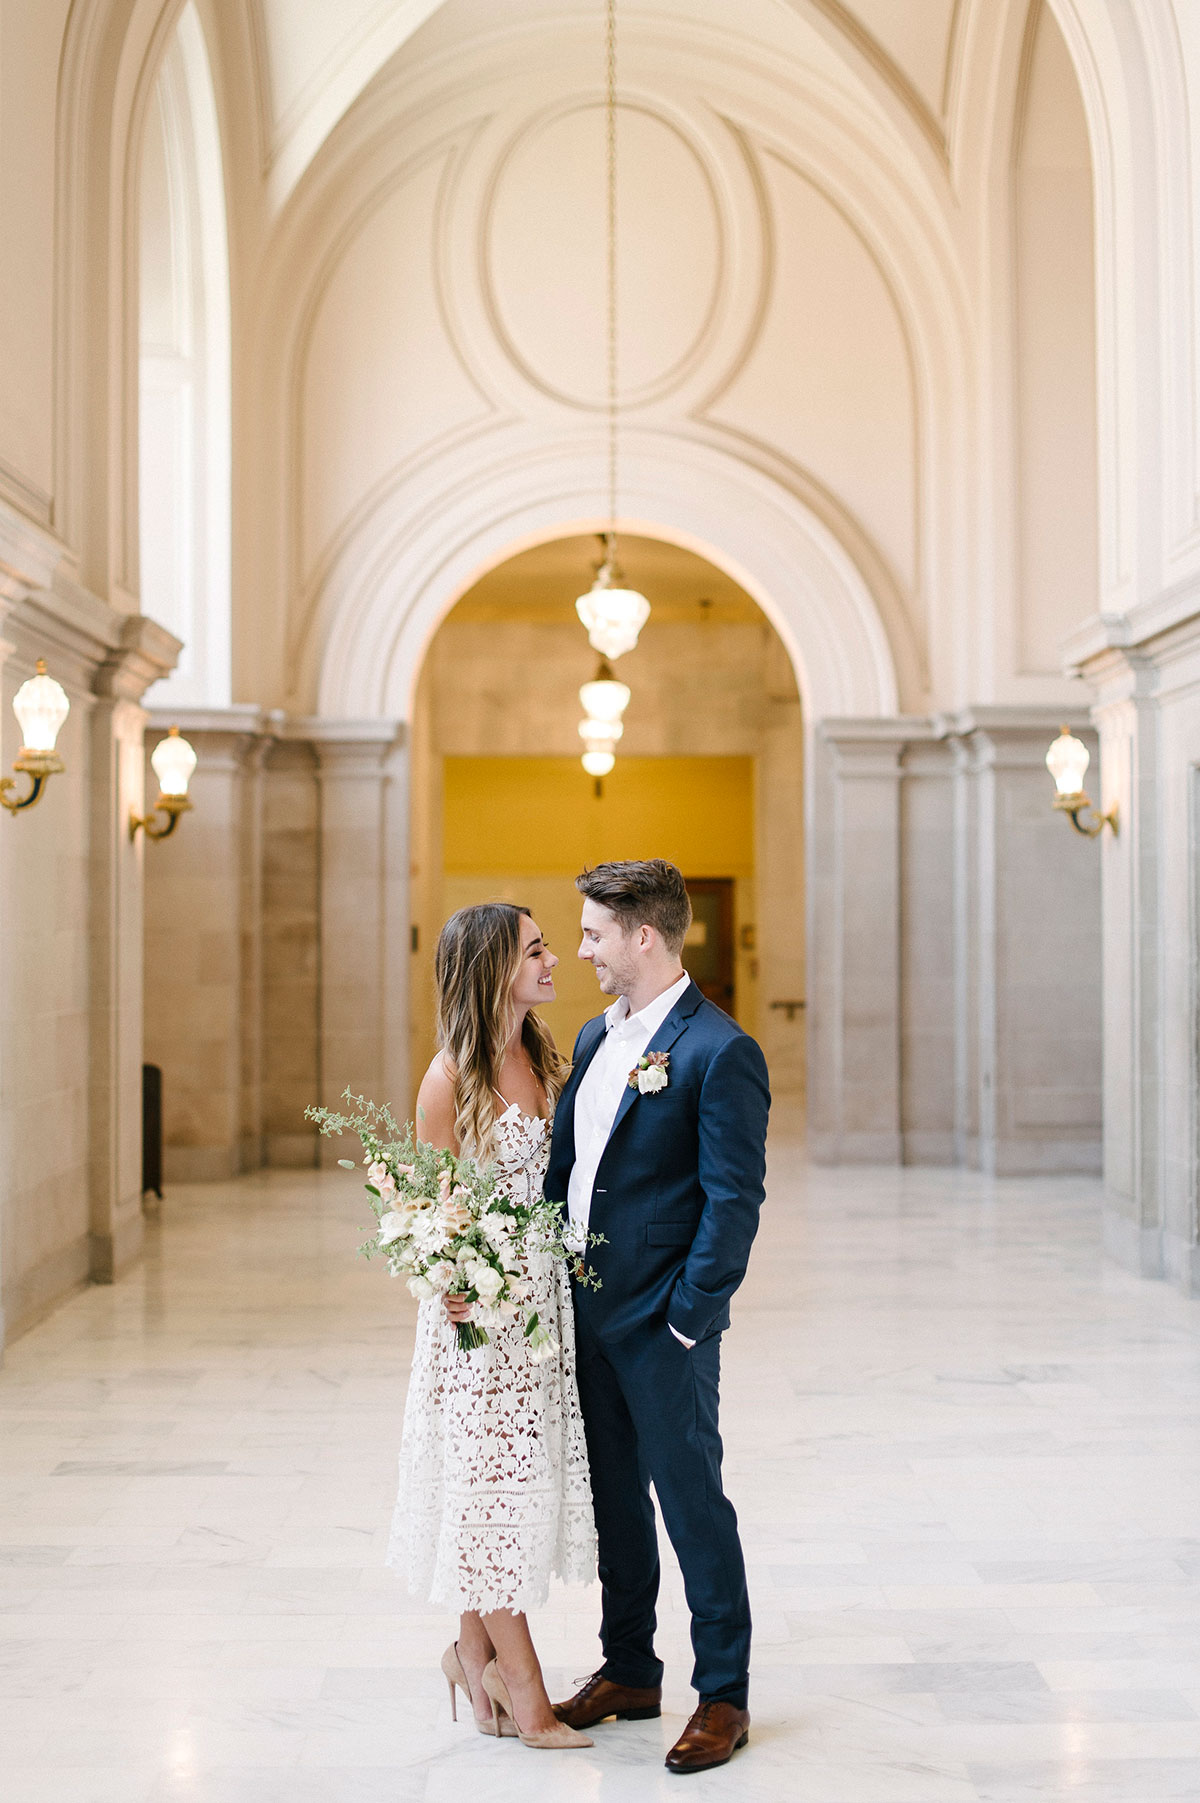 Elegant bride and groom courthouse wedding outfit. Love her lace white dress. // See more: 20 Stunning Civil Wedding Outfit Ideas to Make it Official In Style. // mysweetengagement.com